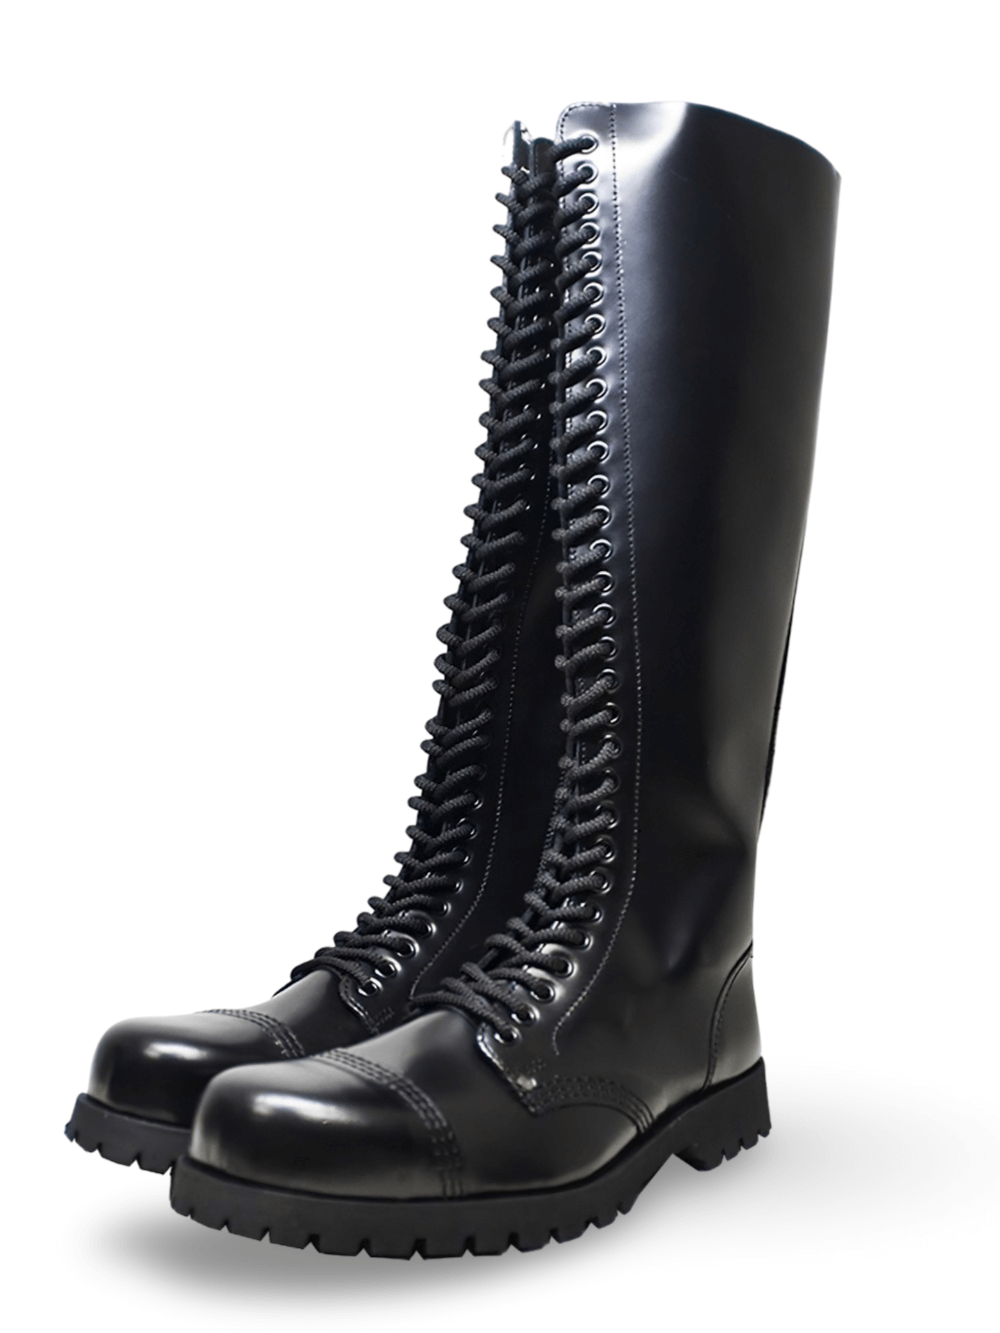 Black Steel Toe Knee High Boots with 30 Eyelet and Zipper